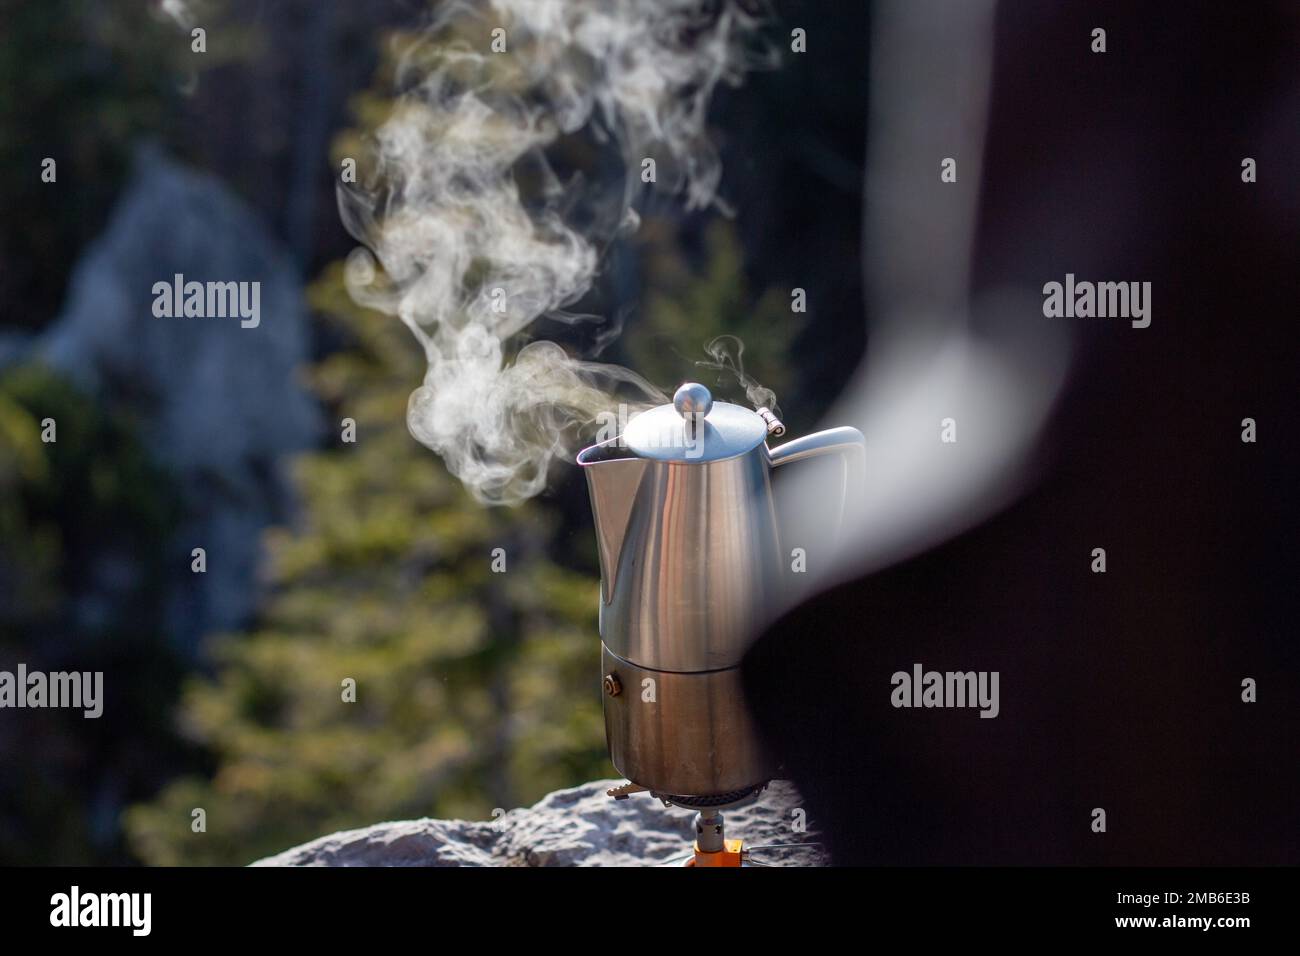 A closeup shot of steam coming out of a teapot that's boiling at a campsite Stock Photo